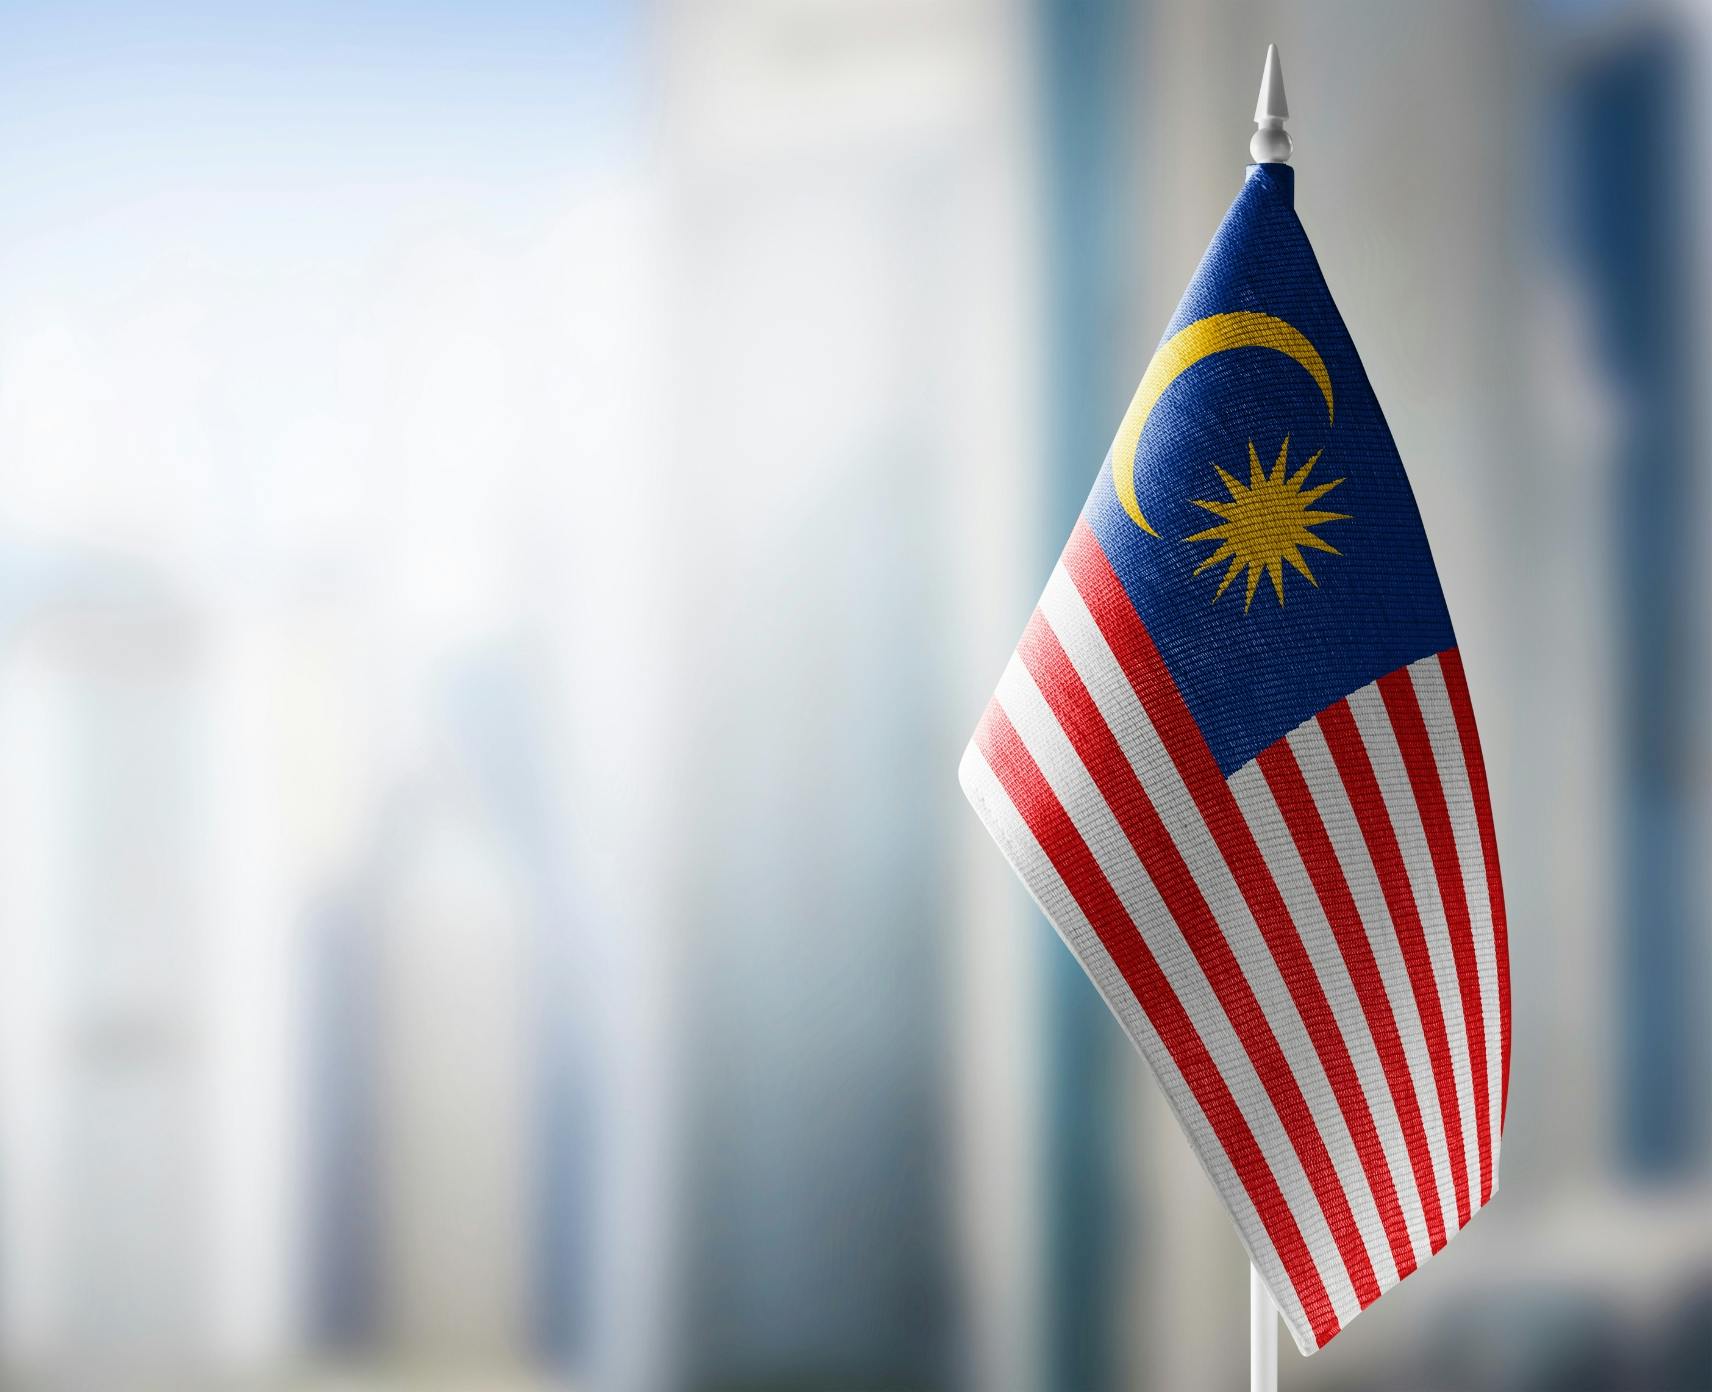 A small Malaysian flag with a blurred background